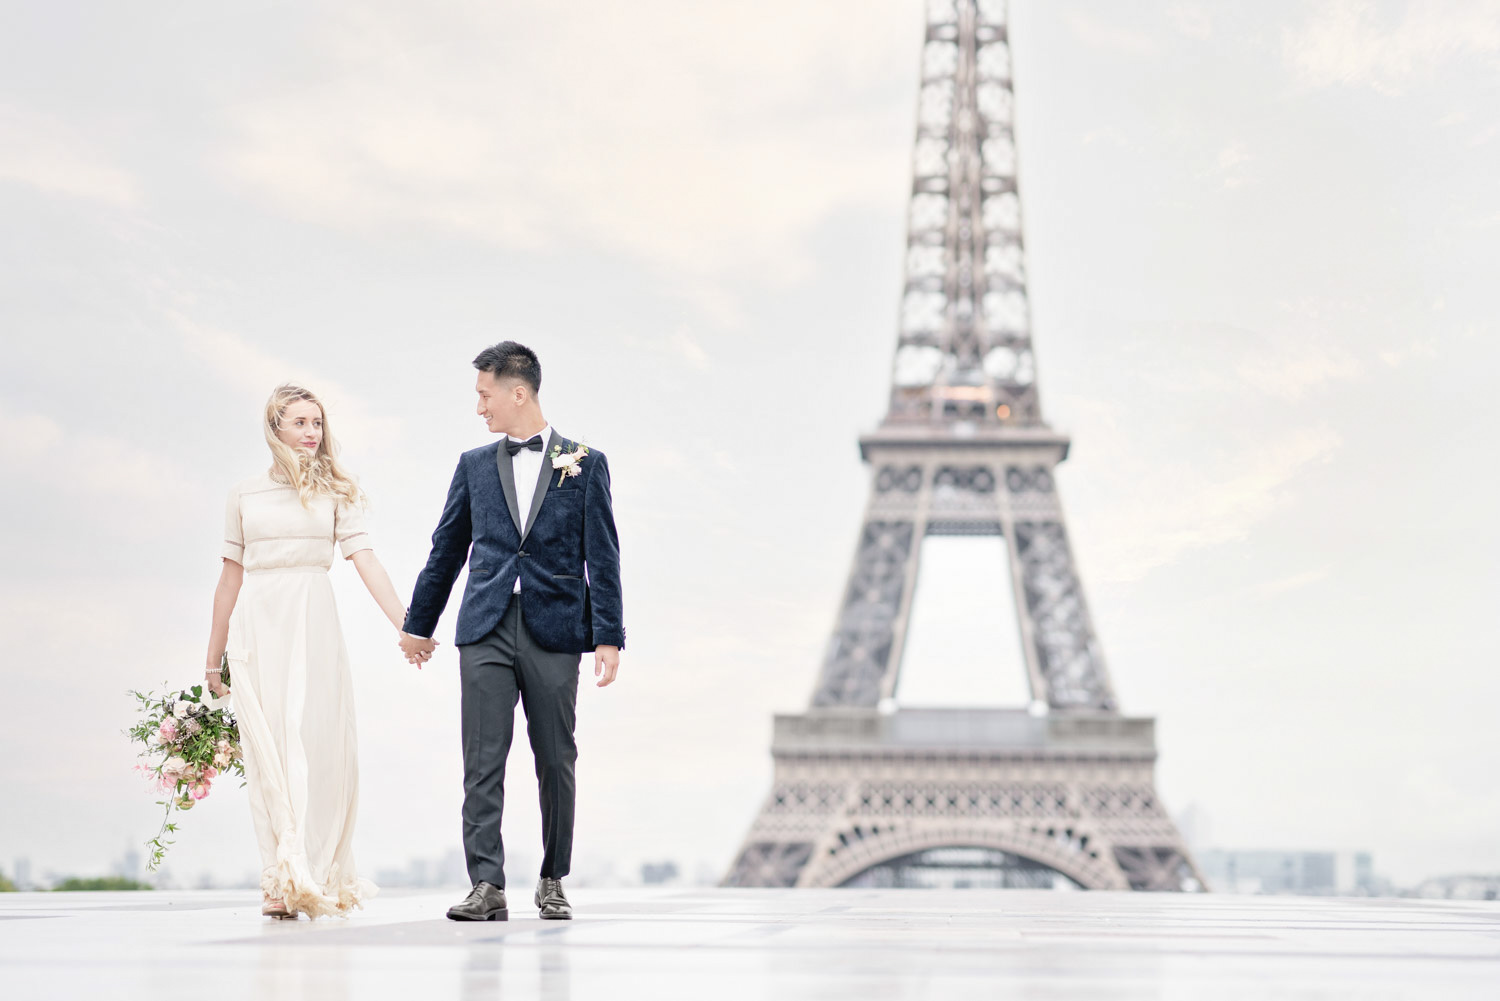 Chateau de Chantilly Elopement: A Magical Setting for Your